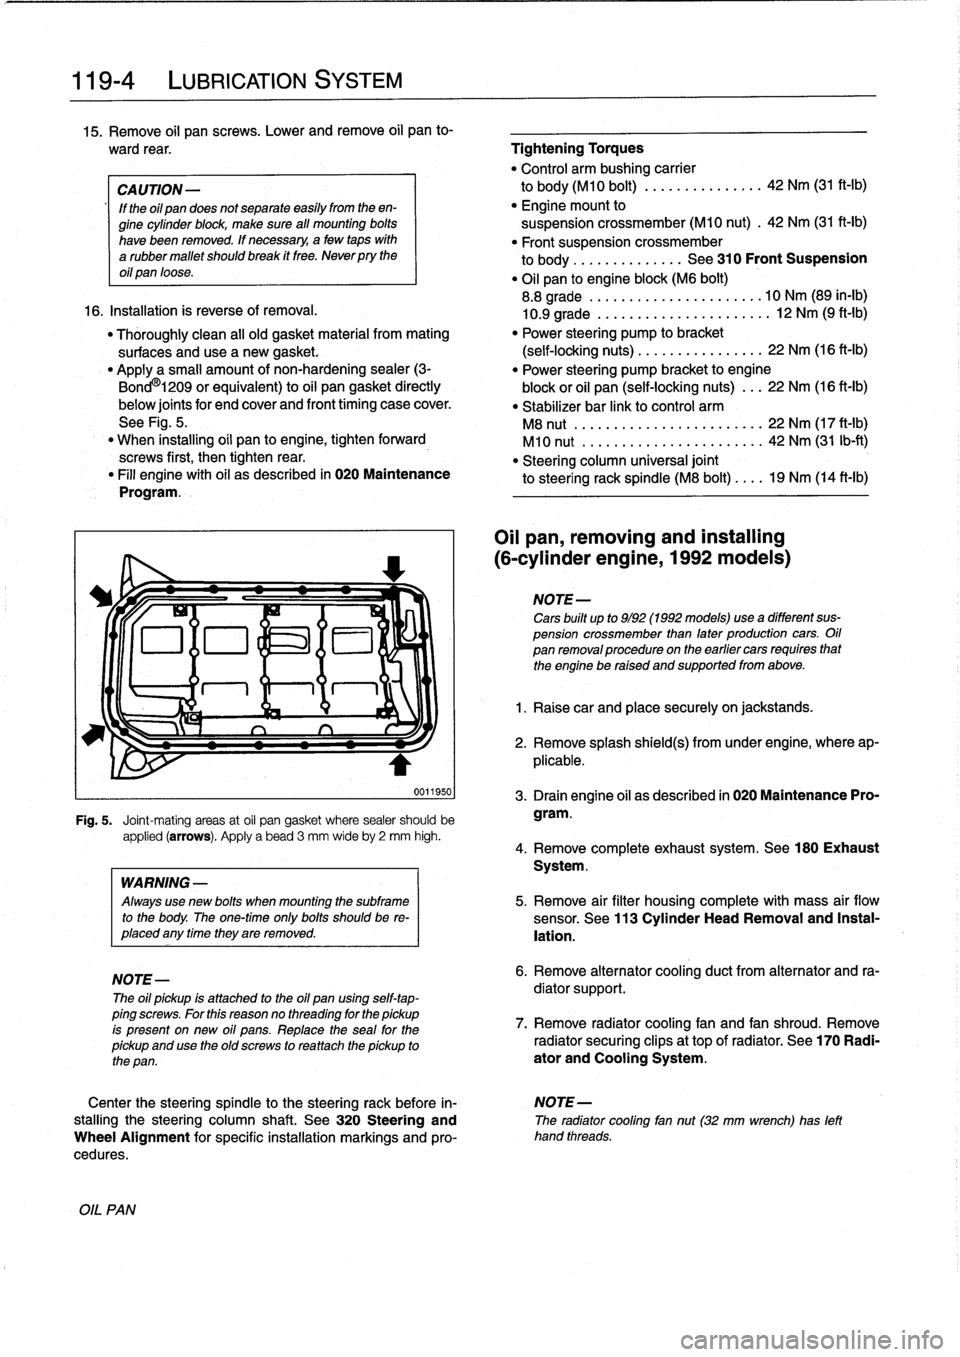 BMW 318i 1996 E36 Workshop Manual 
119-
4

	

LUBRICATION
SYSTEM

15
.
Remove
oil
pan
screws
.
Lower
andremove
oil
pan
to-

ward
rear
.

	

Tightening
Torques

"
Control
arm
bushing
carrier

CAUTION-

	

to
body(M10
bolt)
............